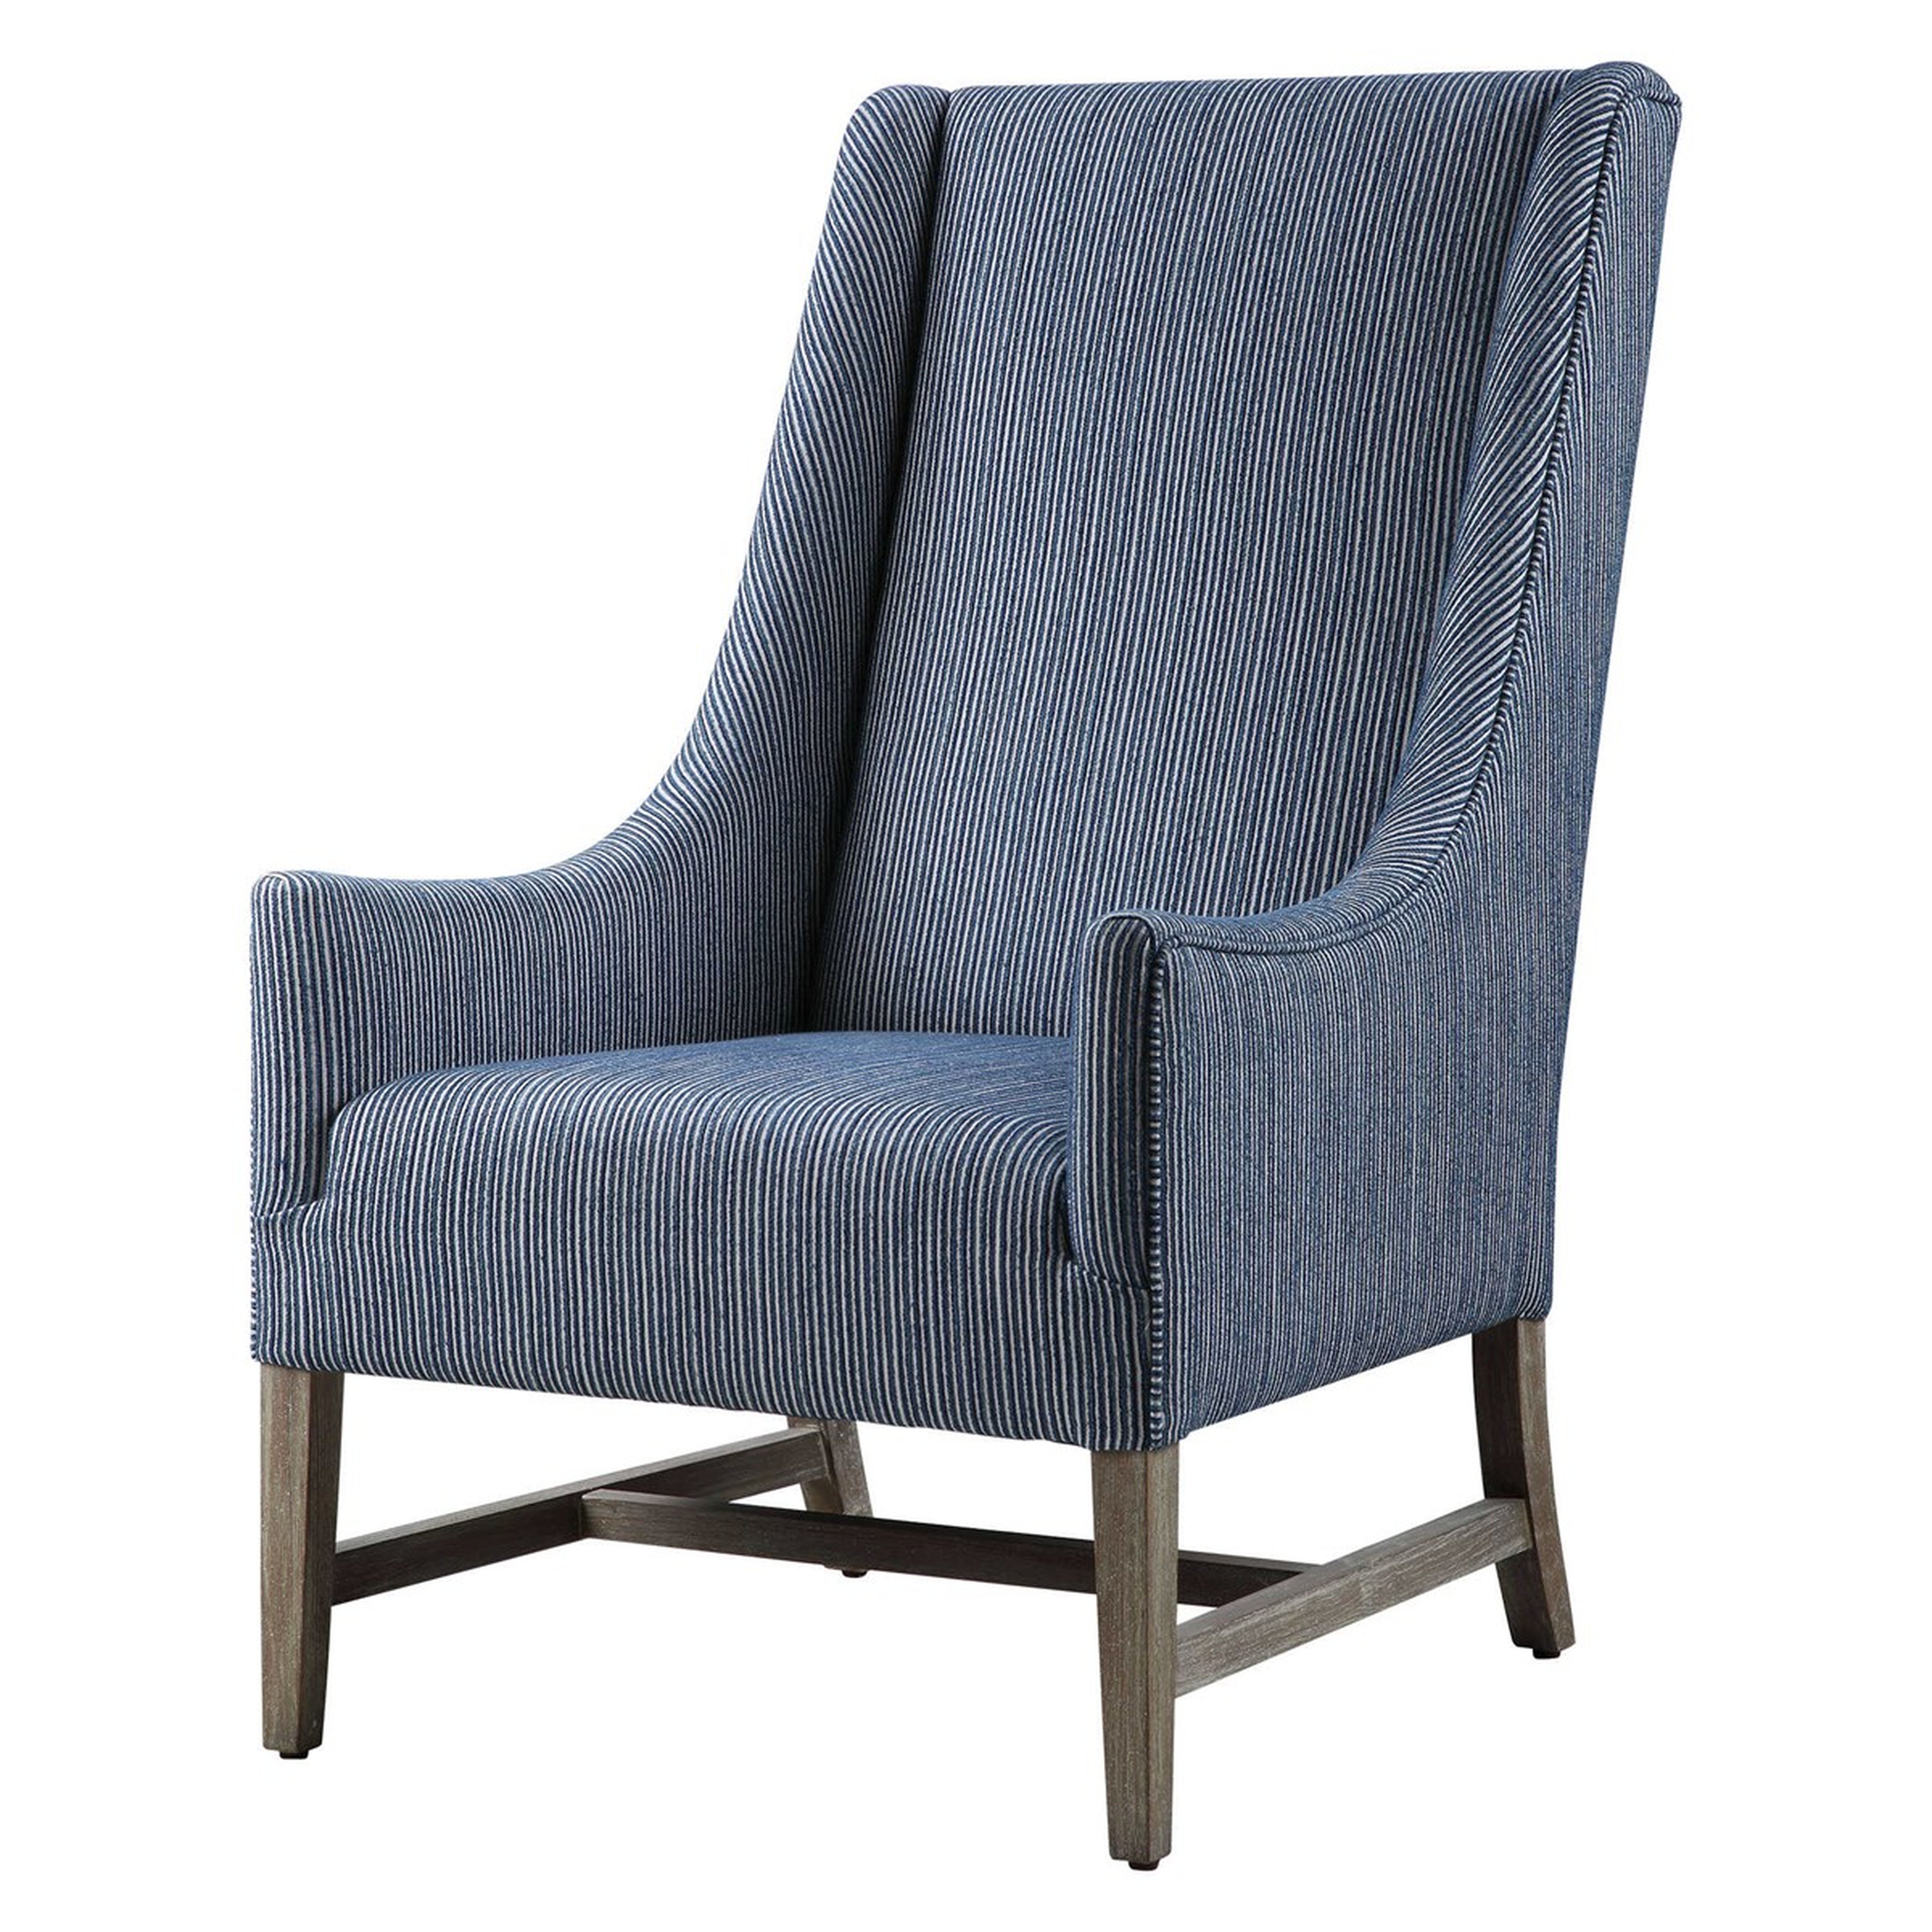 GALIOT ACCENT CHAIR - Hudsonhill Foundry